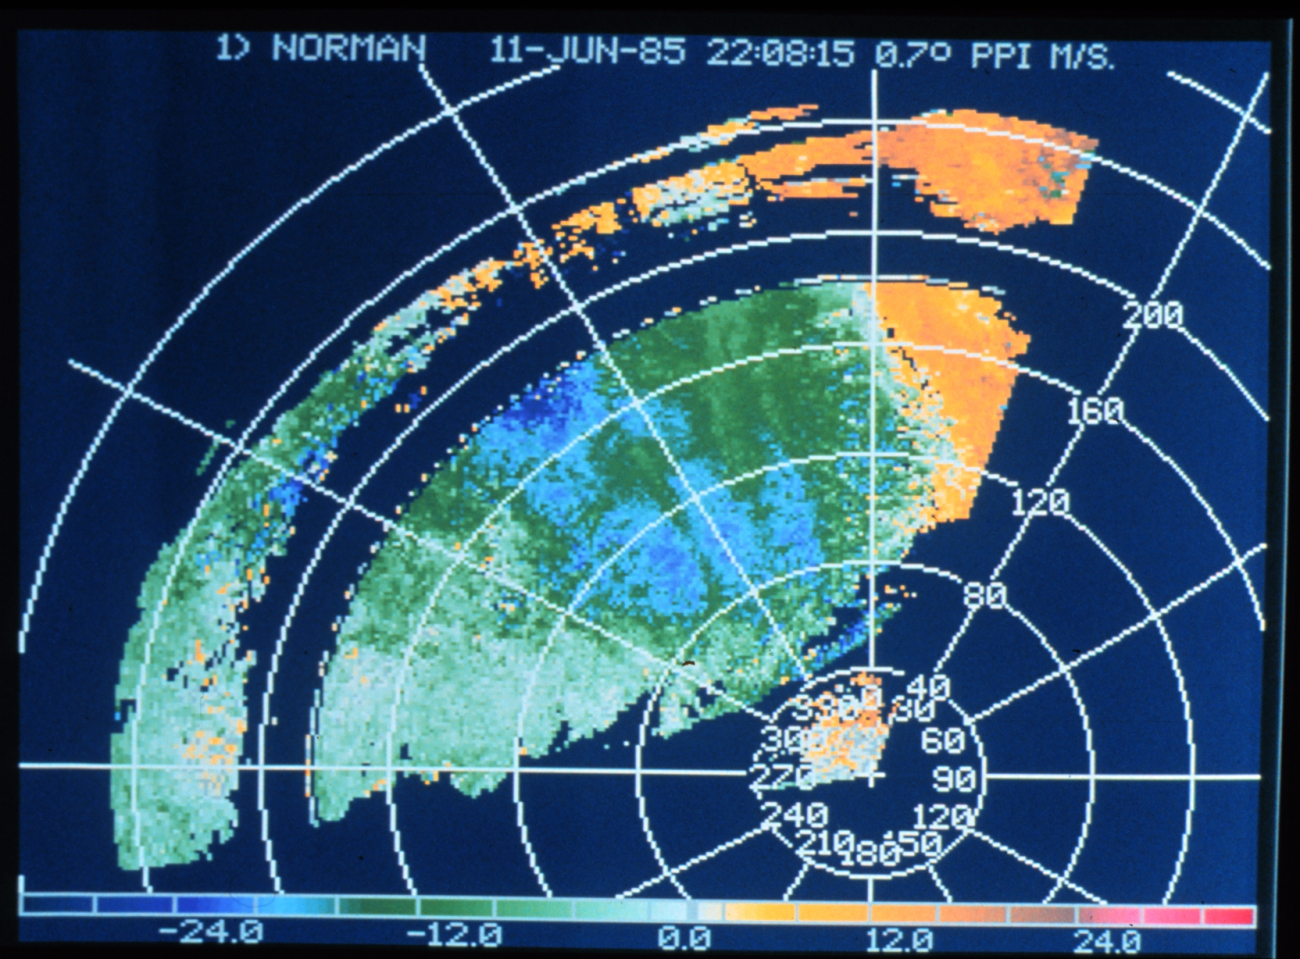 Norman Doppler radar display of wind velocities showing dissipating squall line